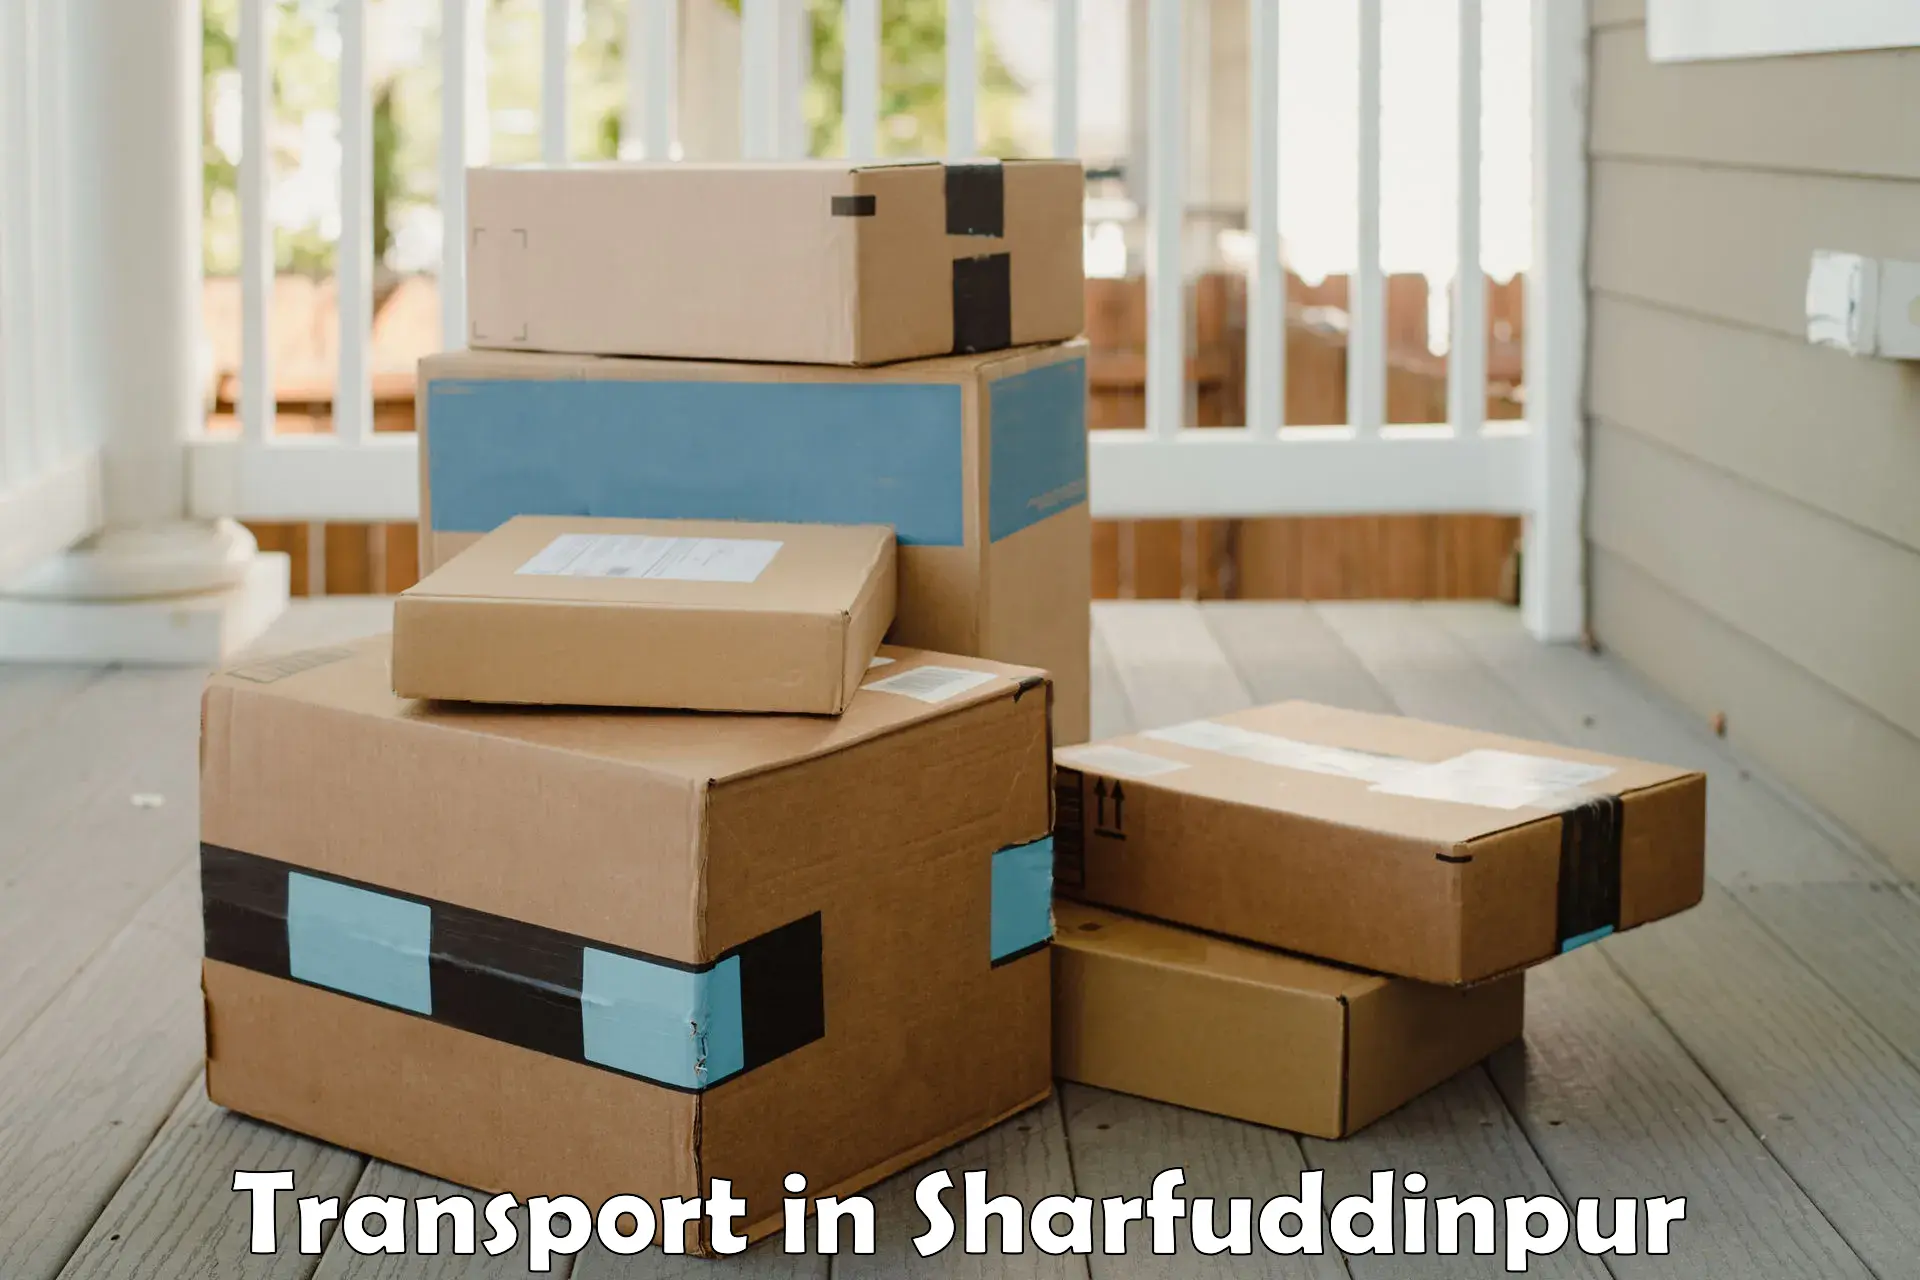 Cargo transport services in Sharfuddinpur